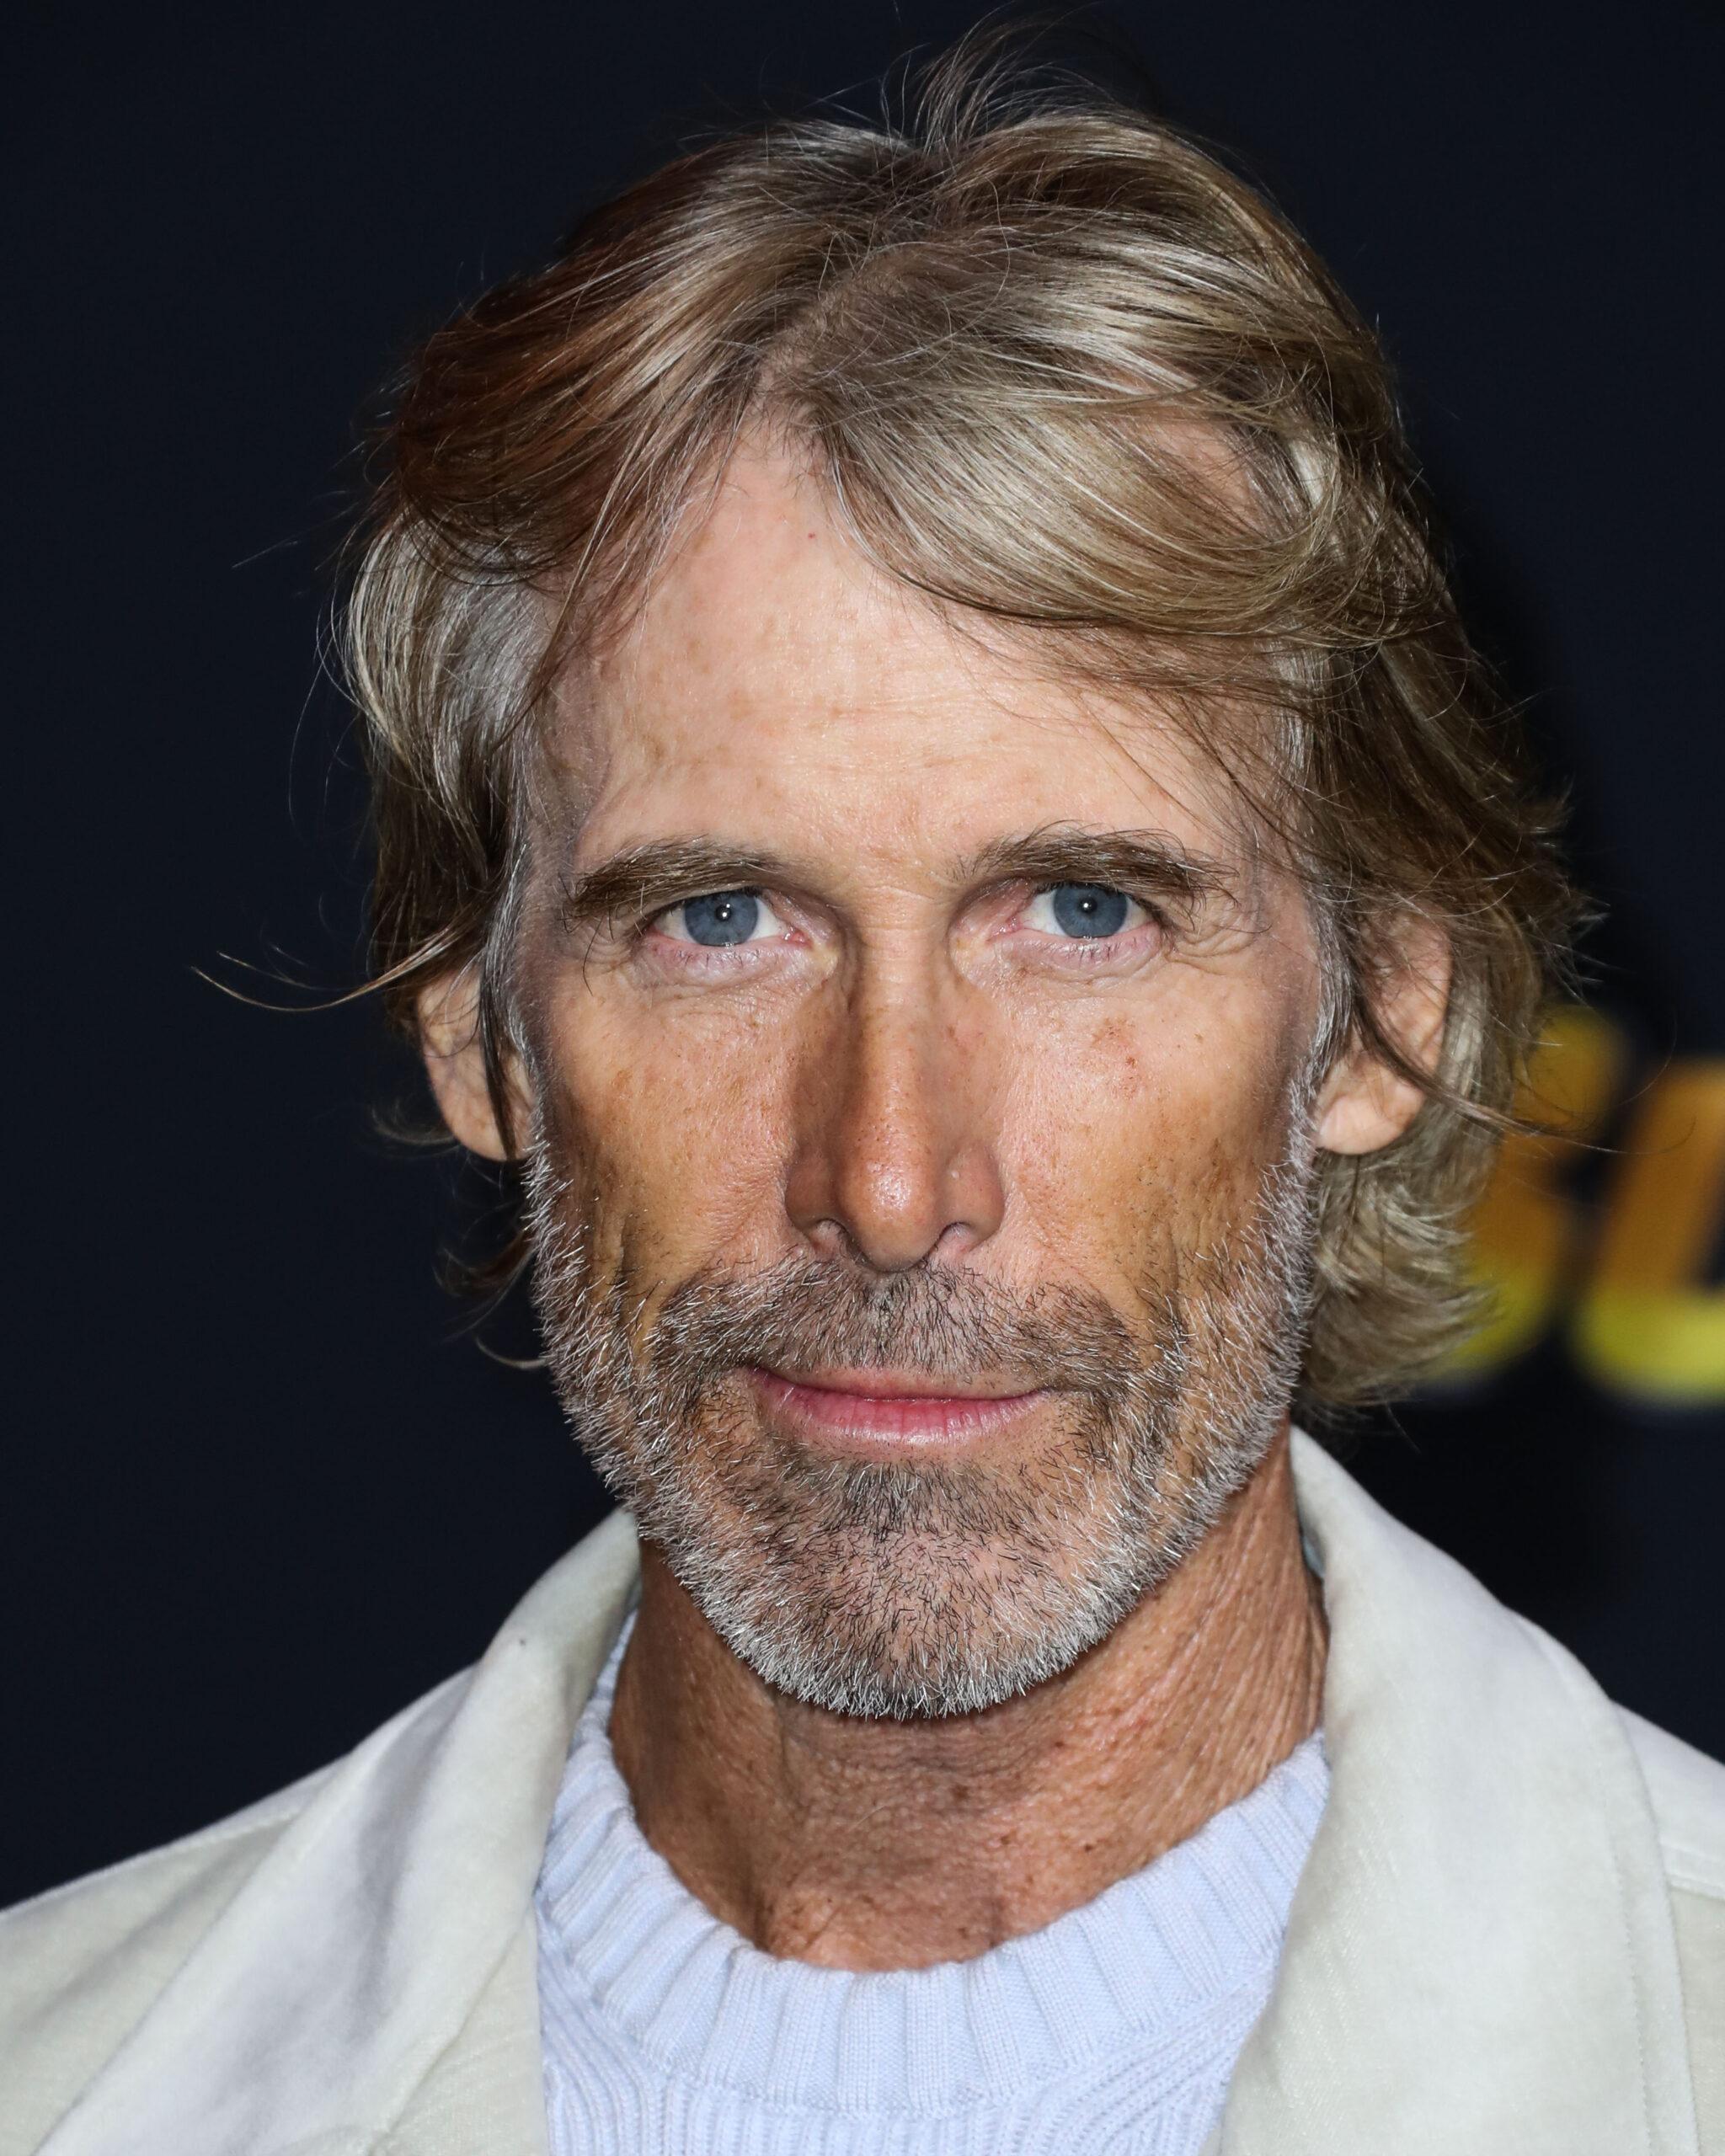 Michael Bay To Produce Movie About Coronavirus COVID-19 Pandemic That Will Film During The Pandemic